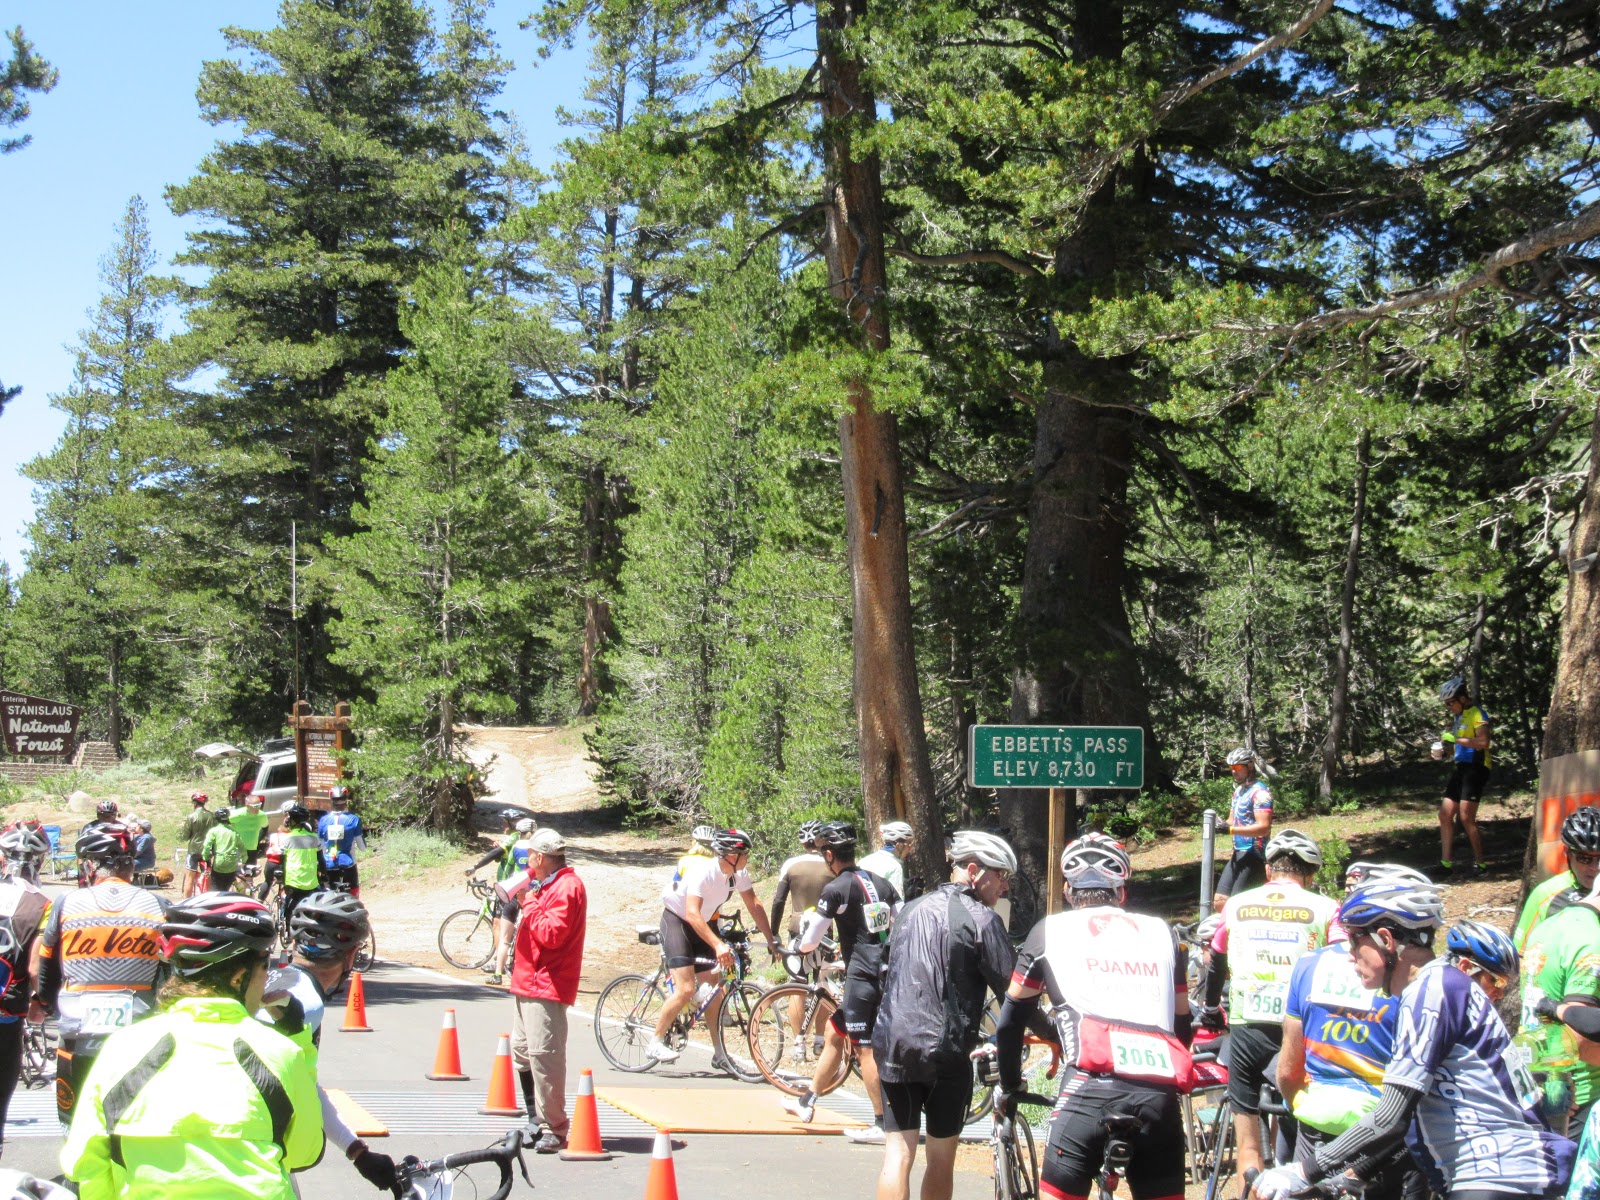 Cyclists congregate next to sign for Ebbetts Pass during the Death Ride